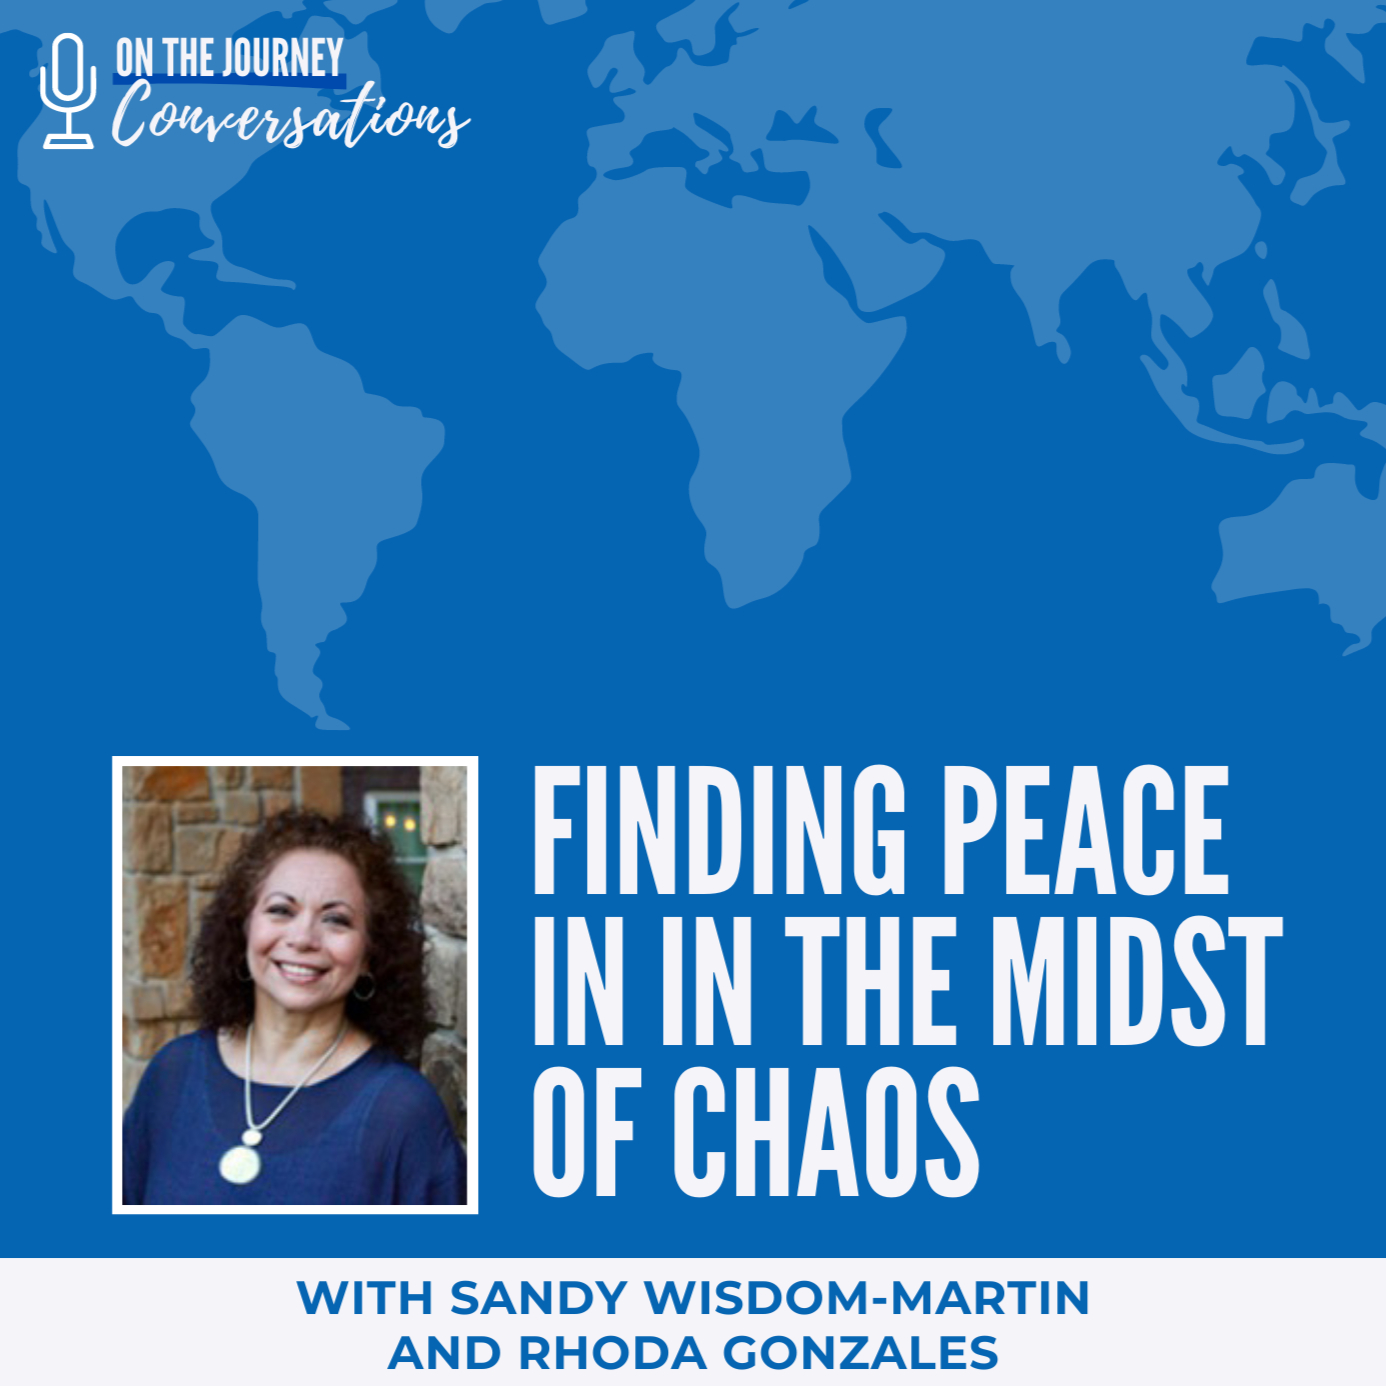 Finding Peace in in the Midst of Chaos